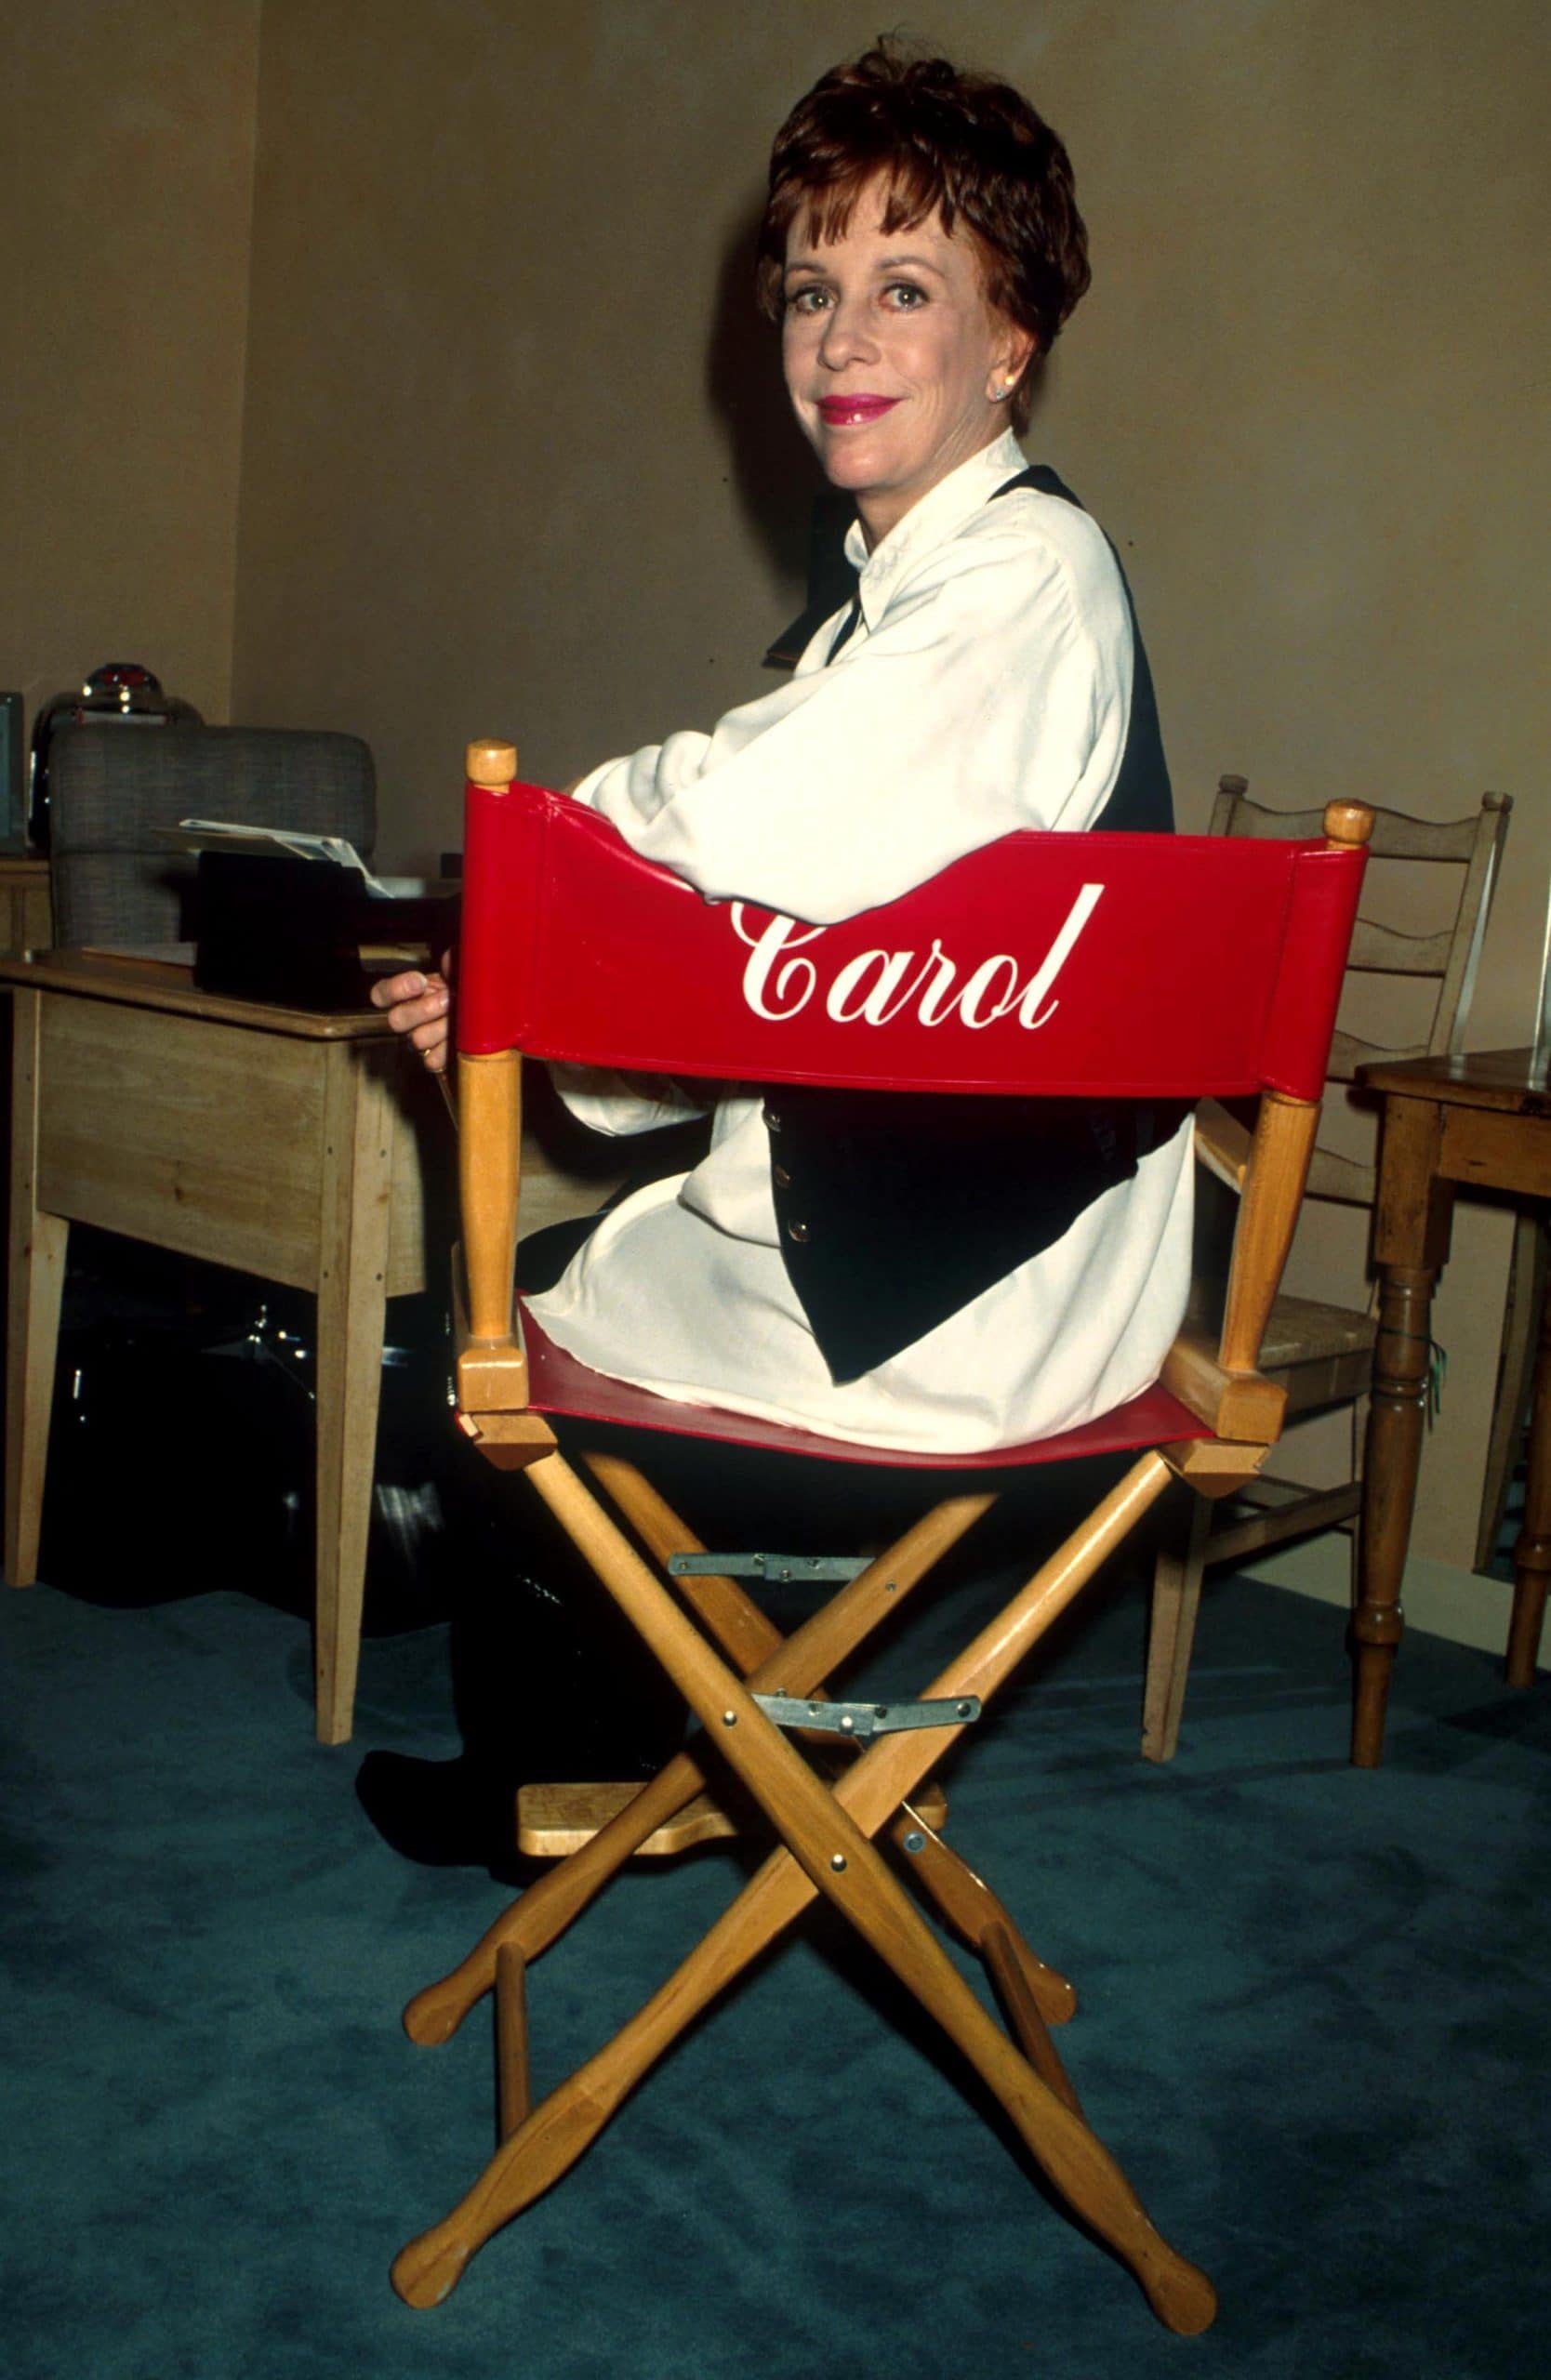 carol burnett sitting in a chair with her name on it 